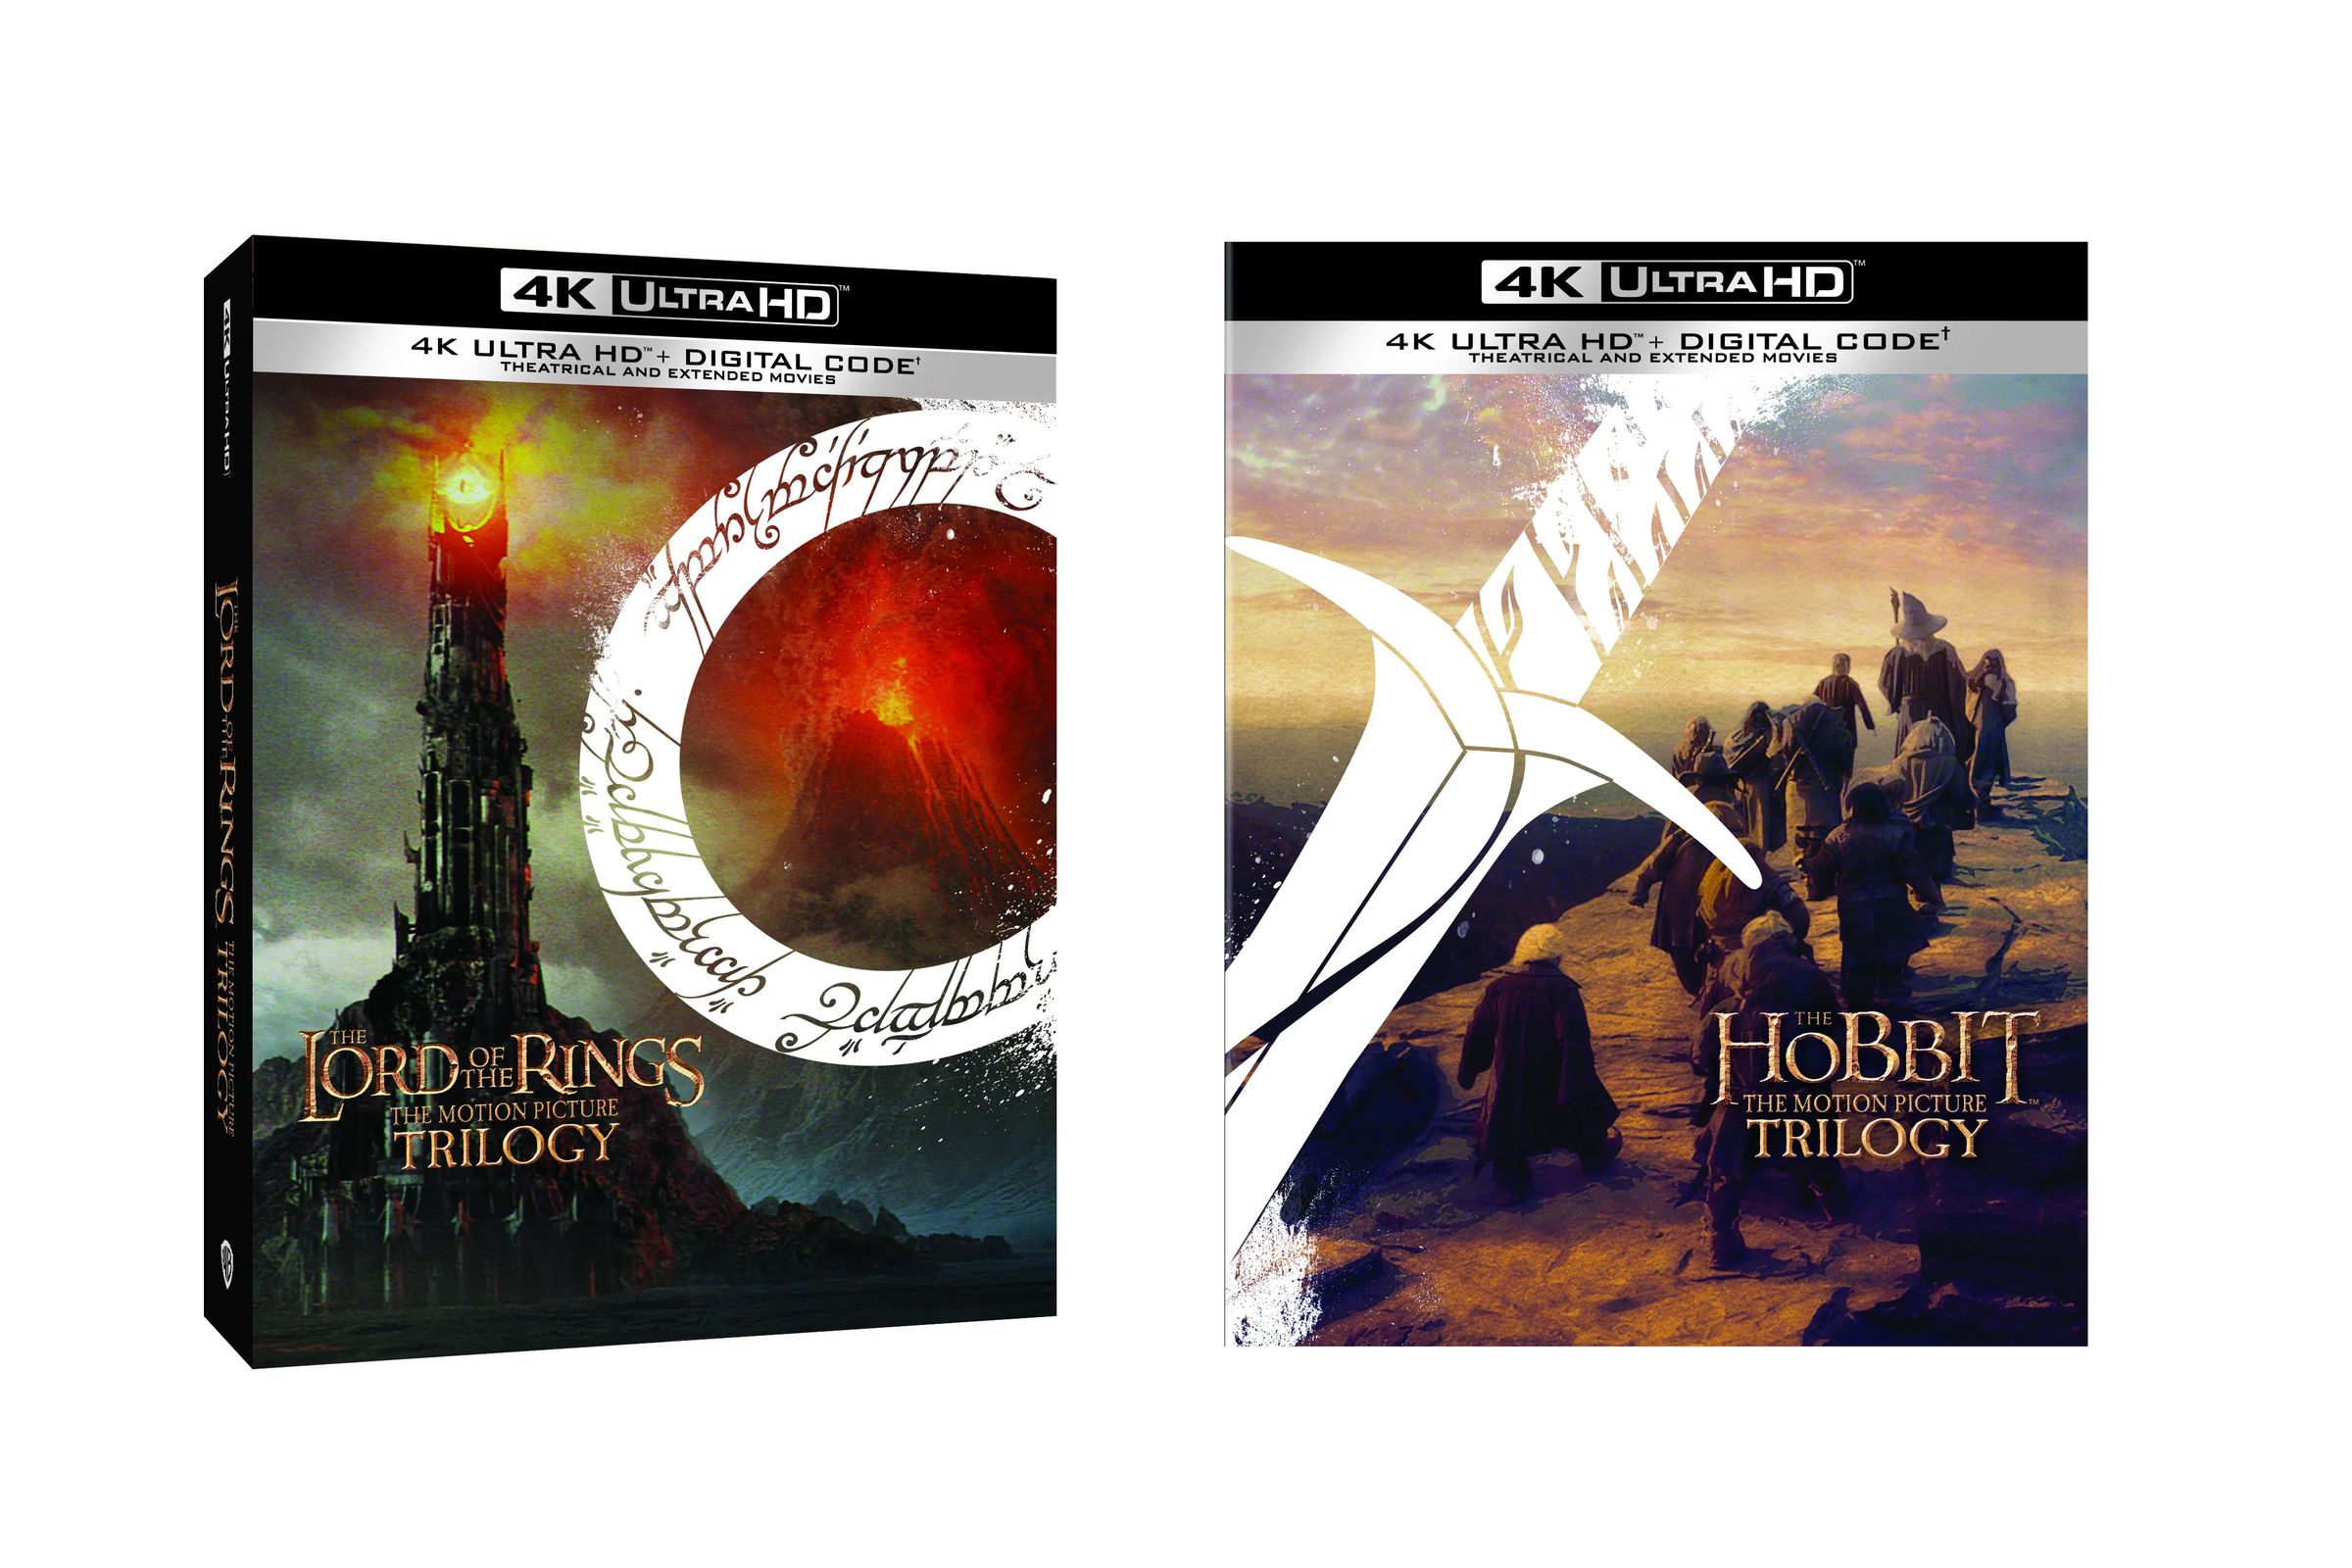 Cover art for the two 4K UHD box-sets of The Lord of the Rings and The Hobbit trilogies. 